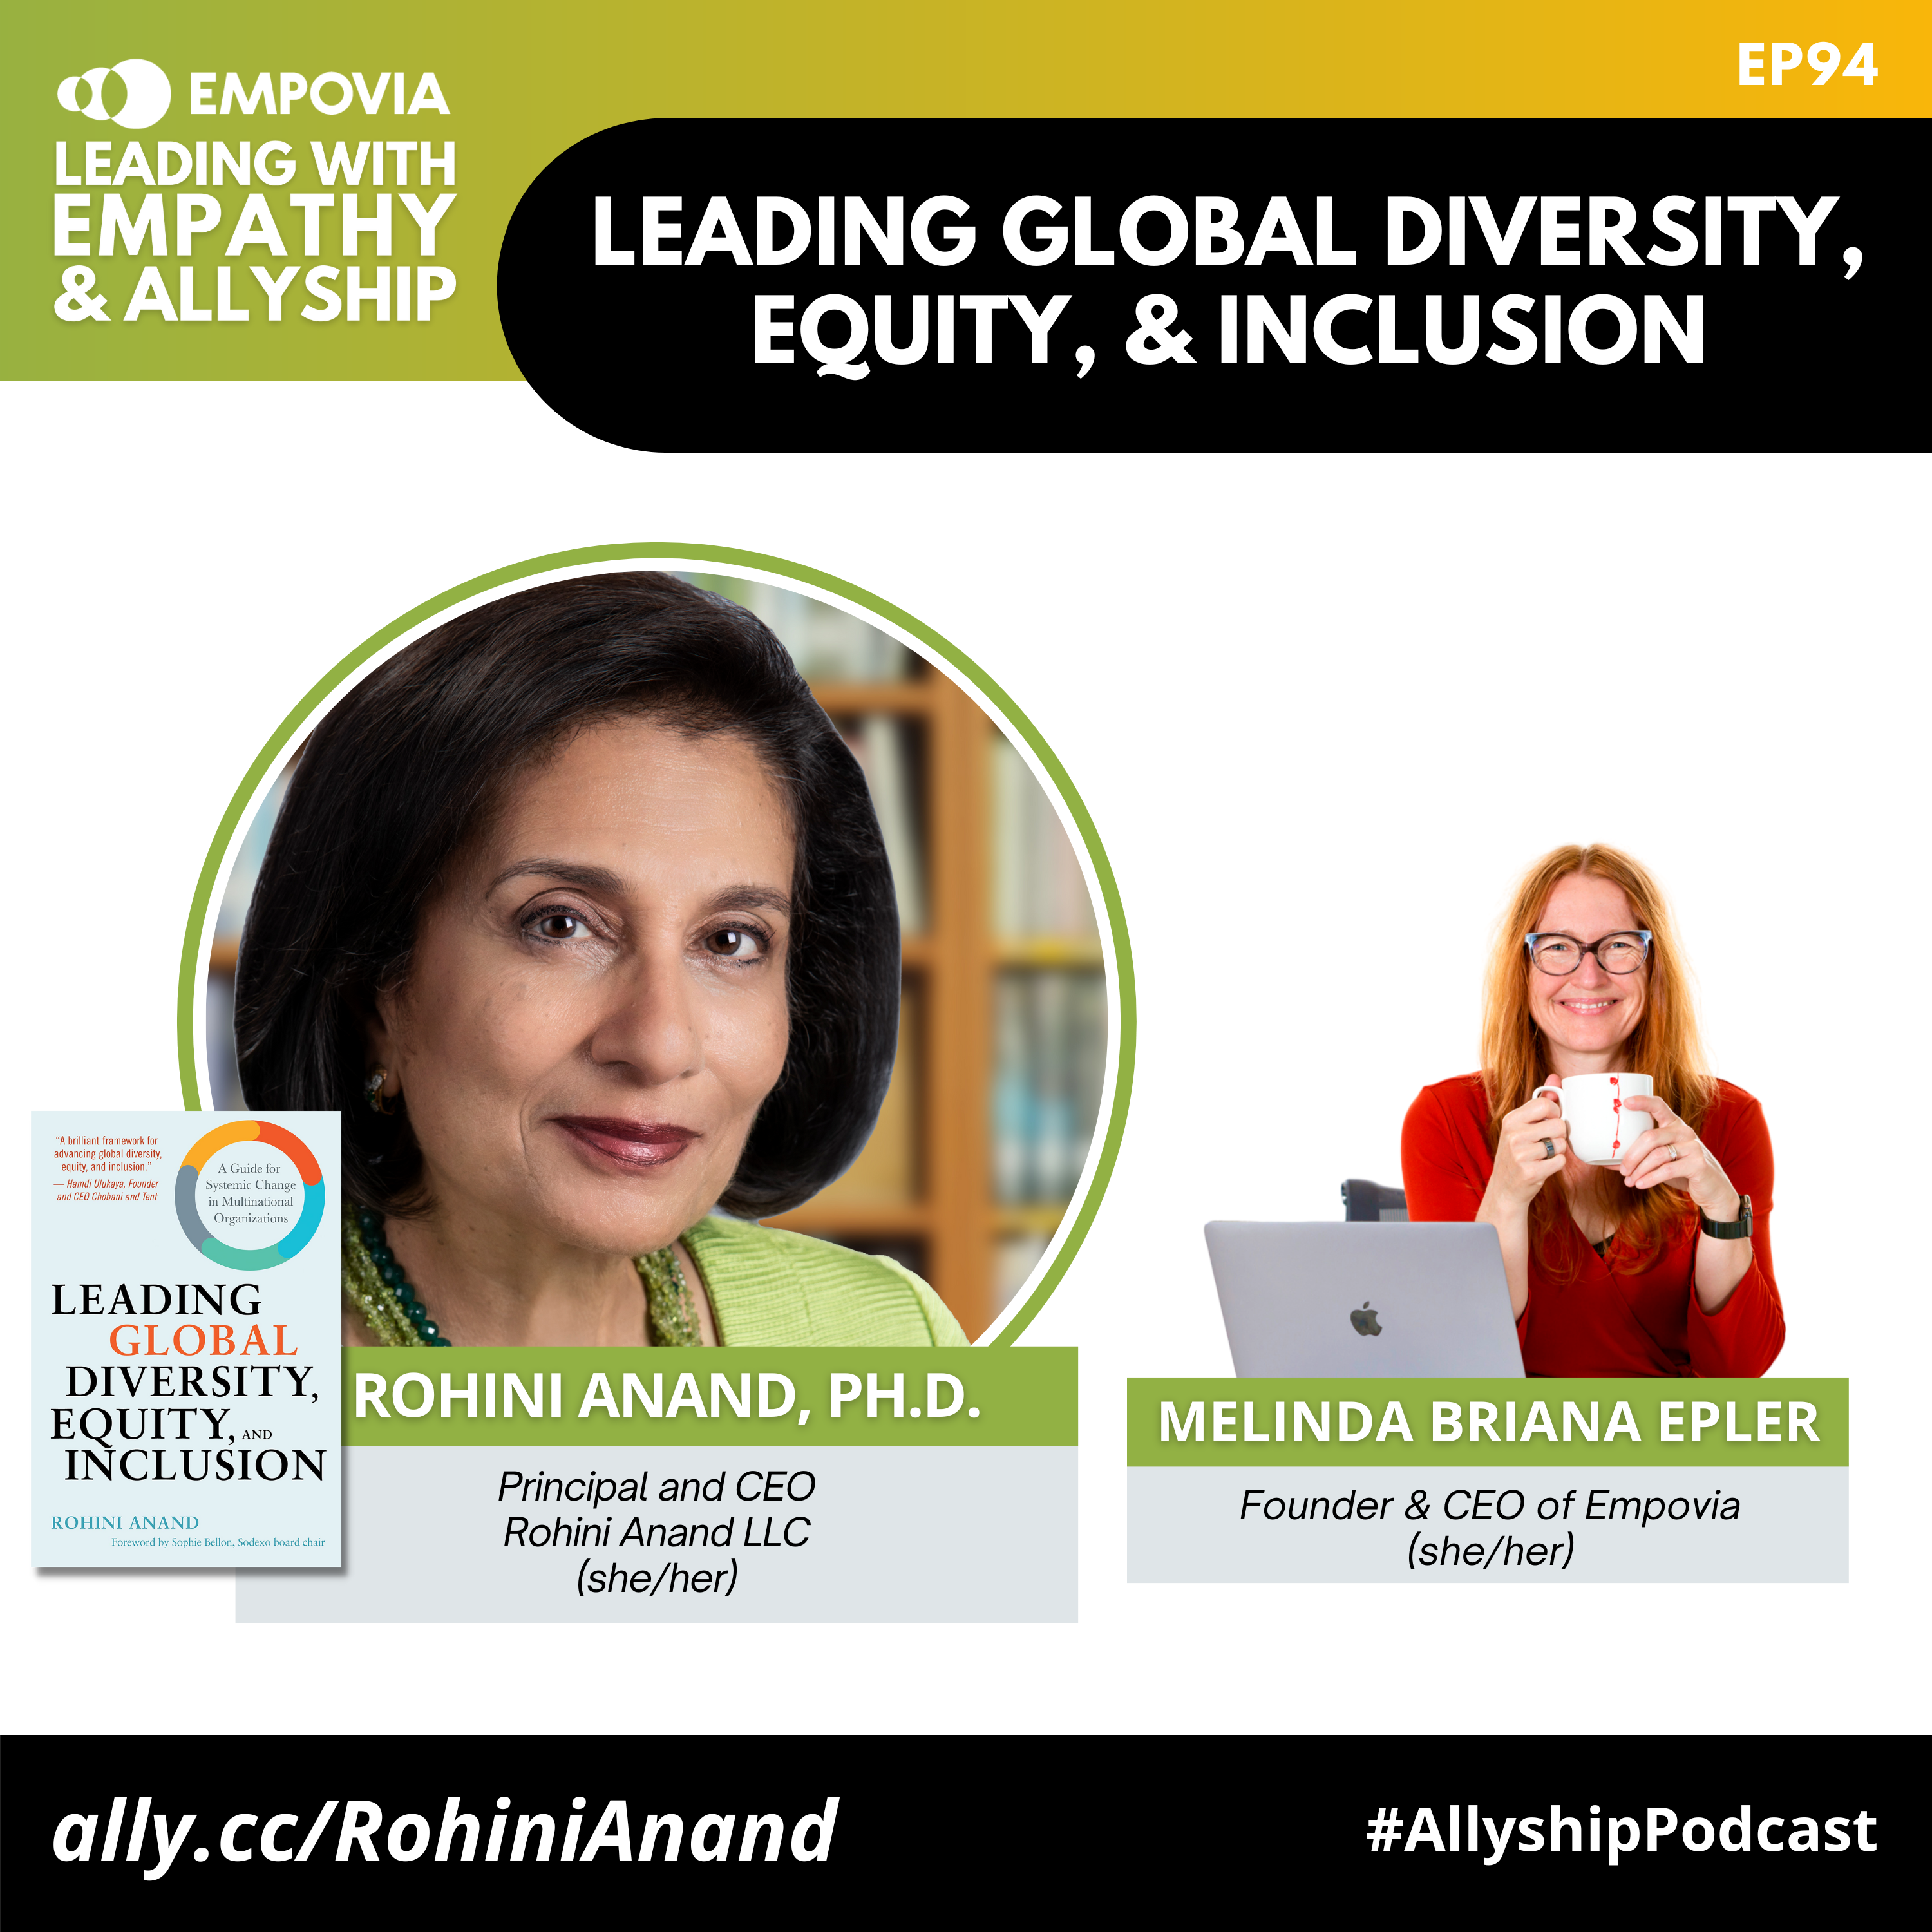 Leading With Empathy & Allyship promo and photos of Dr. Rohini Anand, an Asian American female with short black hair, apple green dress, and emerald-and-olive green beaded necklace; beside her is the grey book cover of Leading Global Diversity, Equity, and Inclusion: A Guide for Systemic Change in Multinational Organizations; and host Melinda Briana Epler, a White woman with red hair, glasses, and orange shirt holding a white mug behind a laptop.